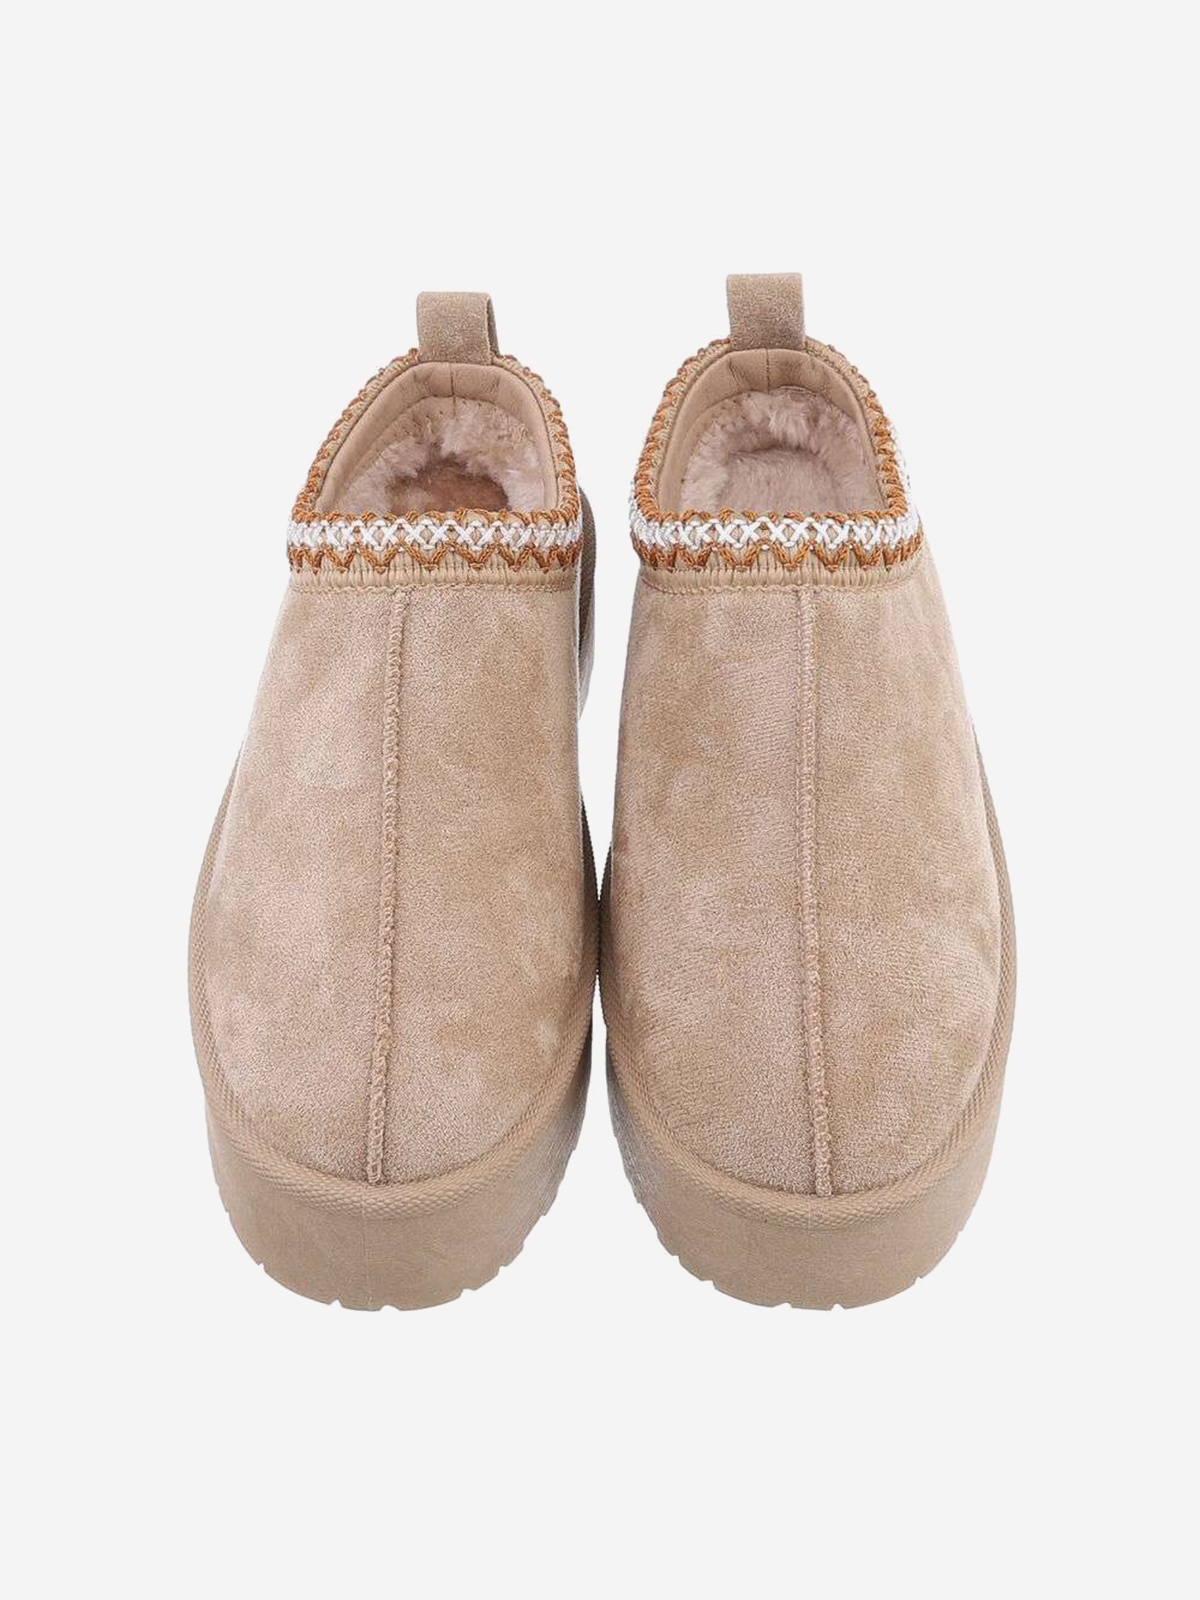 UGG style women's slippers with platform in khaki